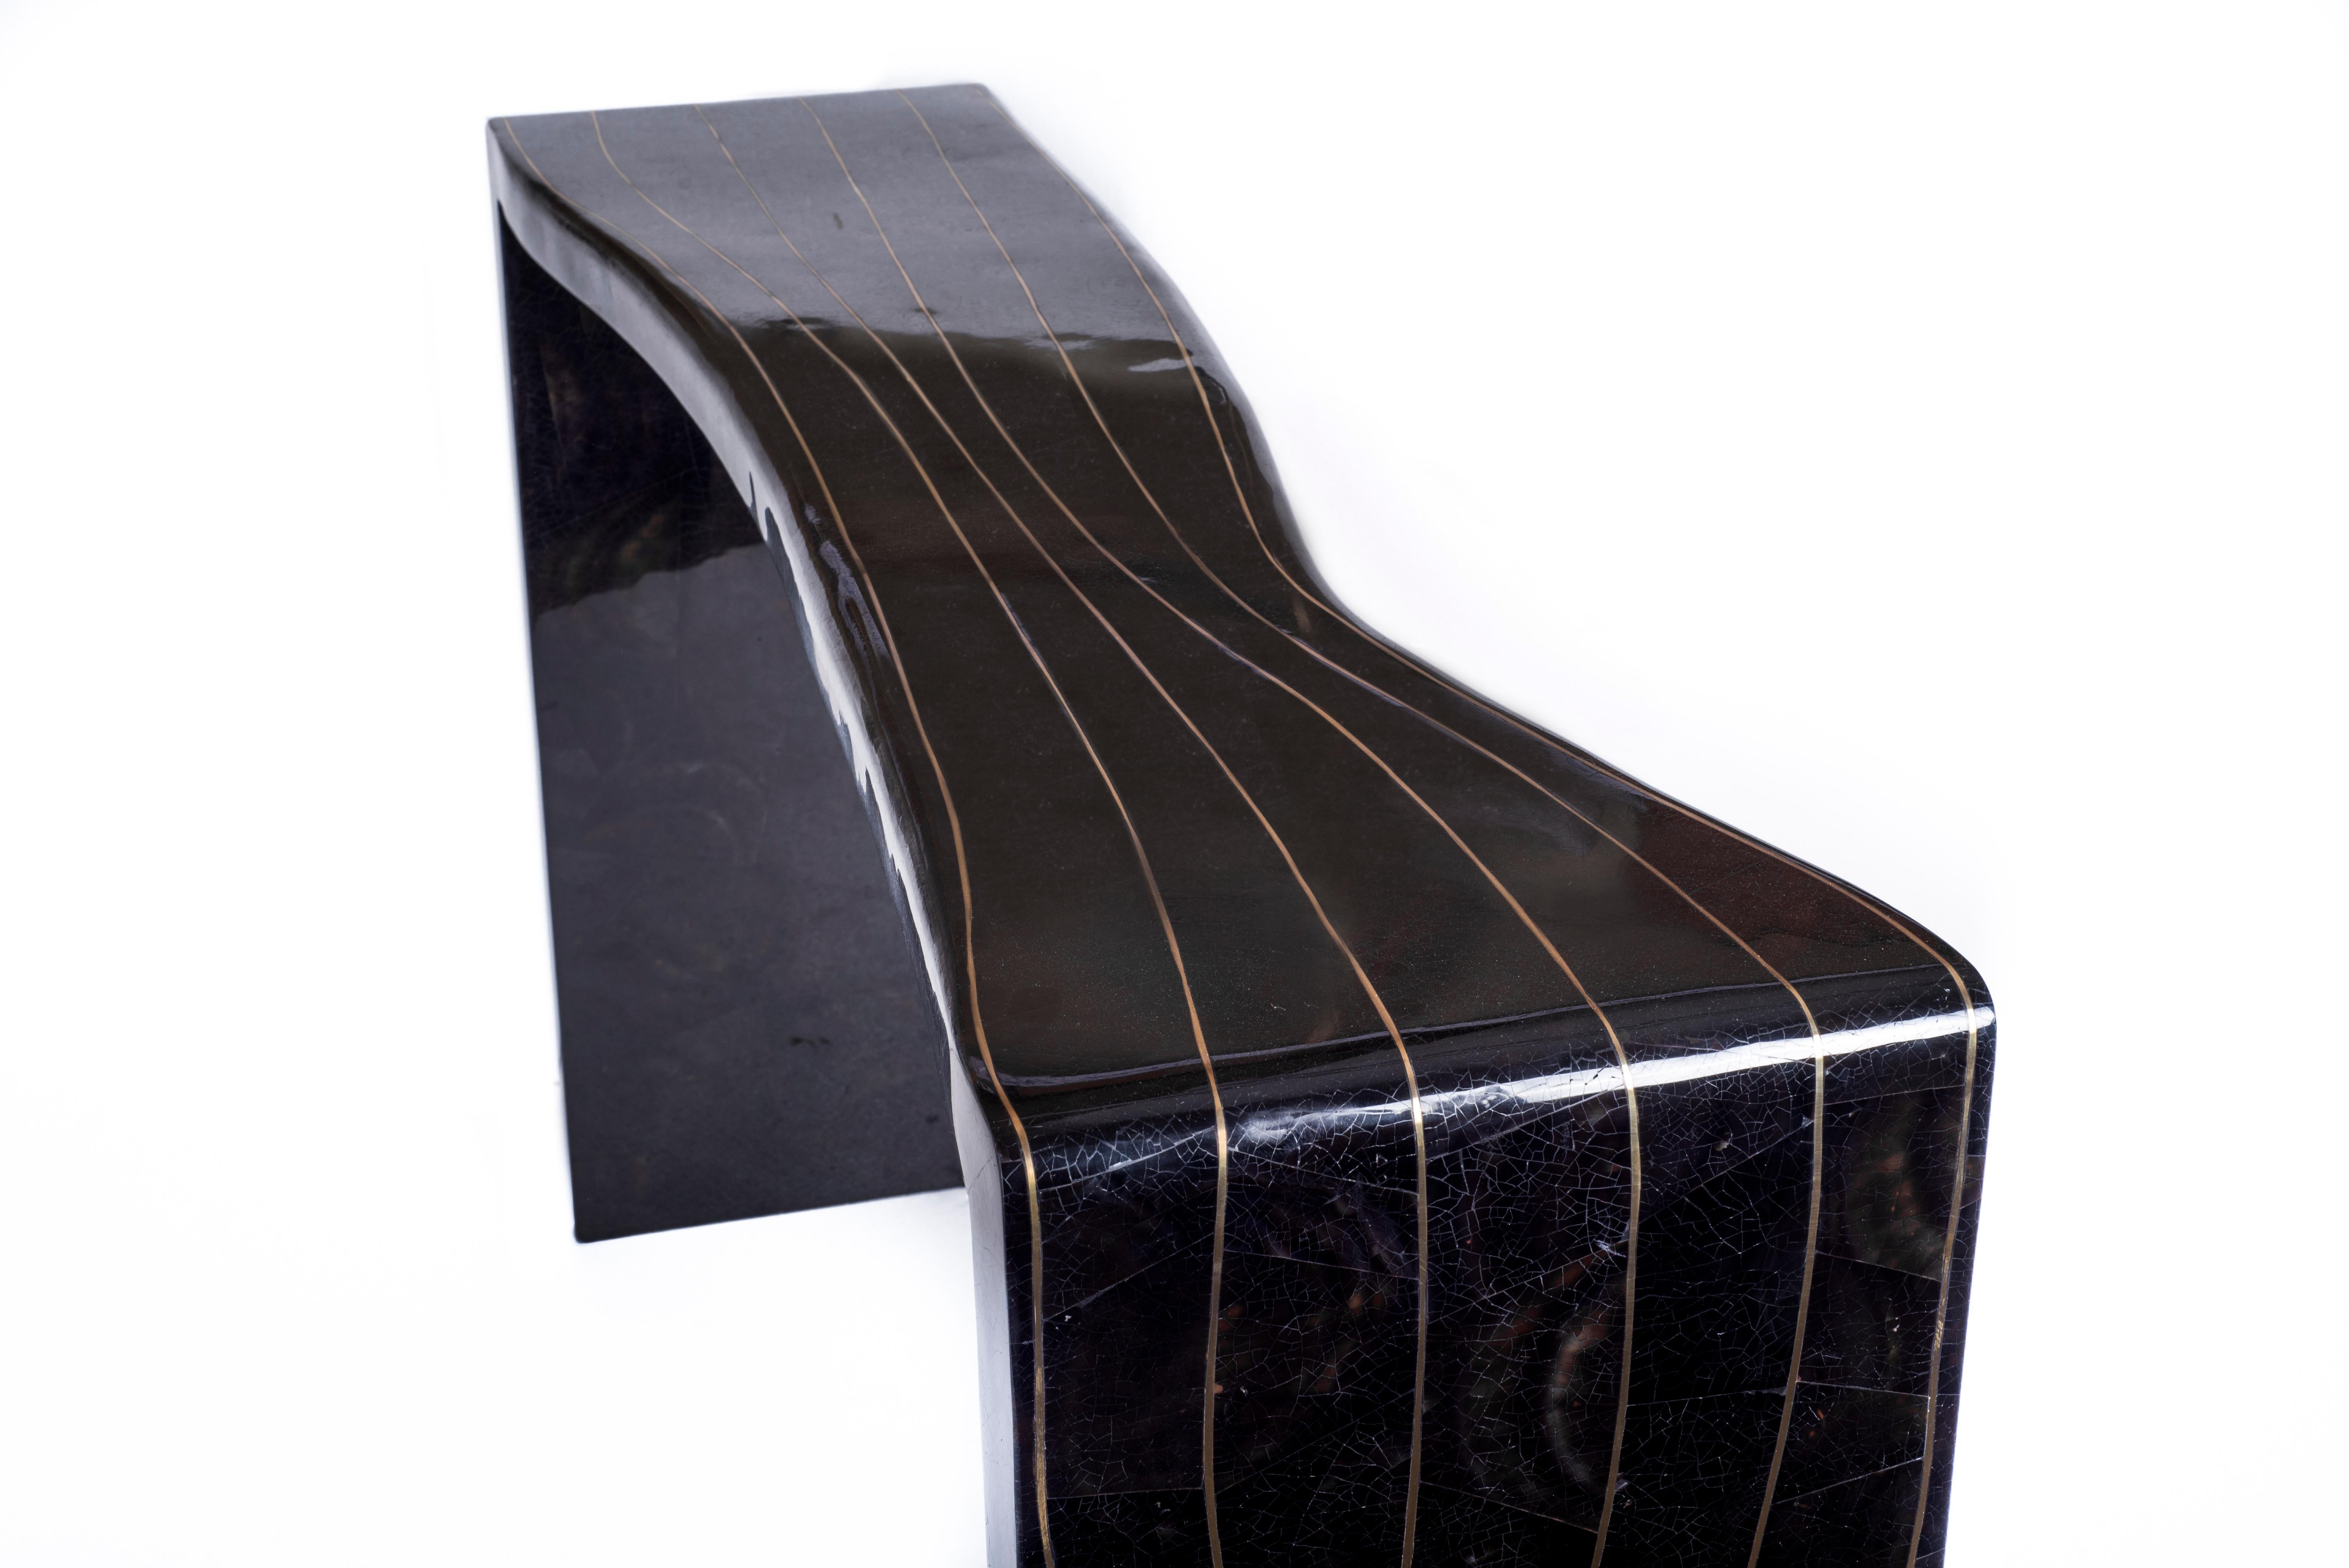 The Storm Console is both simplistic and bold with it's design. The amorphous shape is inlaid in black pen shell, with thin and whimsical bronze-patina brass inserts to create the 'storm' inspired effect. Available in black shagreen and cream